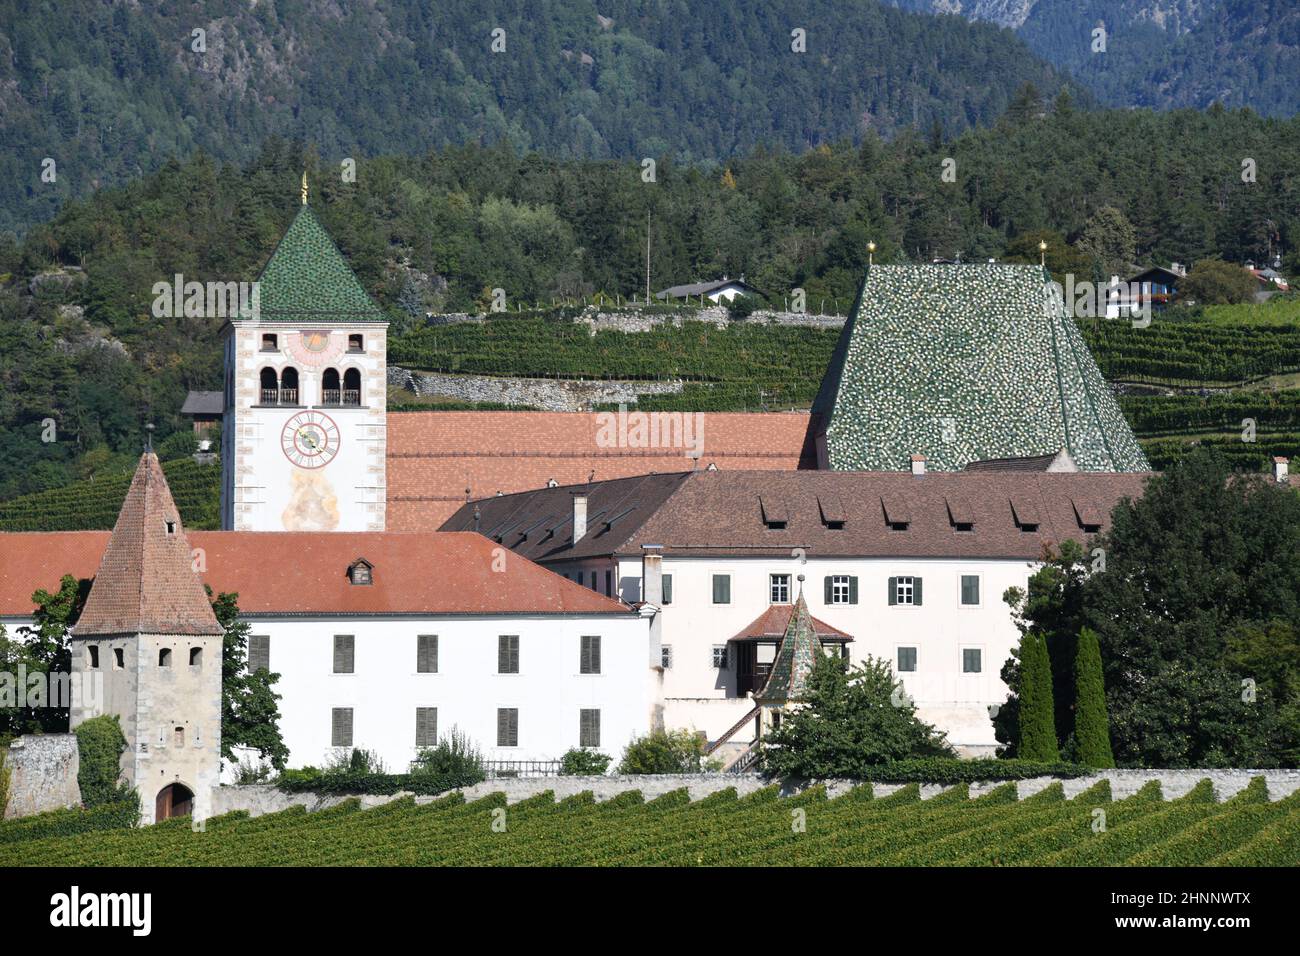 Neustift Abbey is located north of Bressanone in the Trentino - South Tyrol region,Italy. It was built in Romanesque style in 1190. The municipality of Vahrn is located in the Eisack Valley. Stock Photo